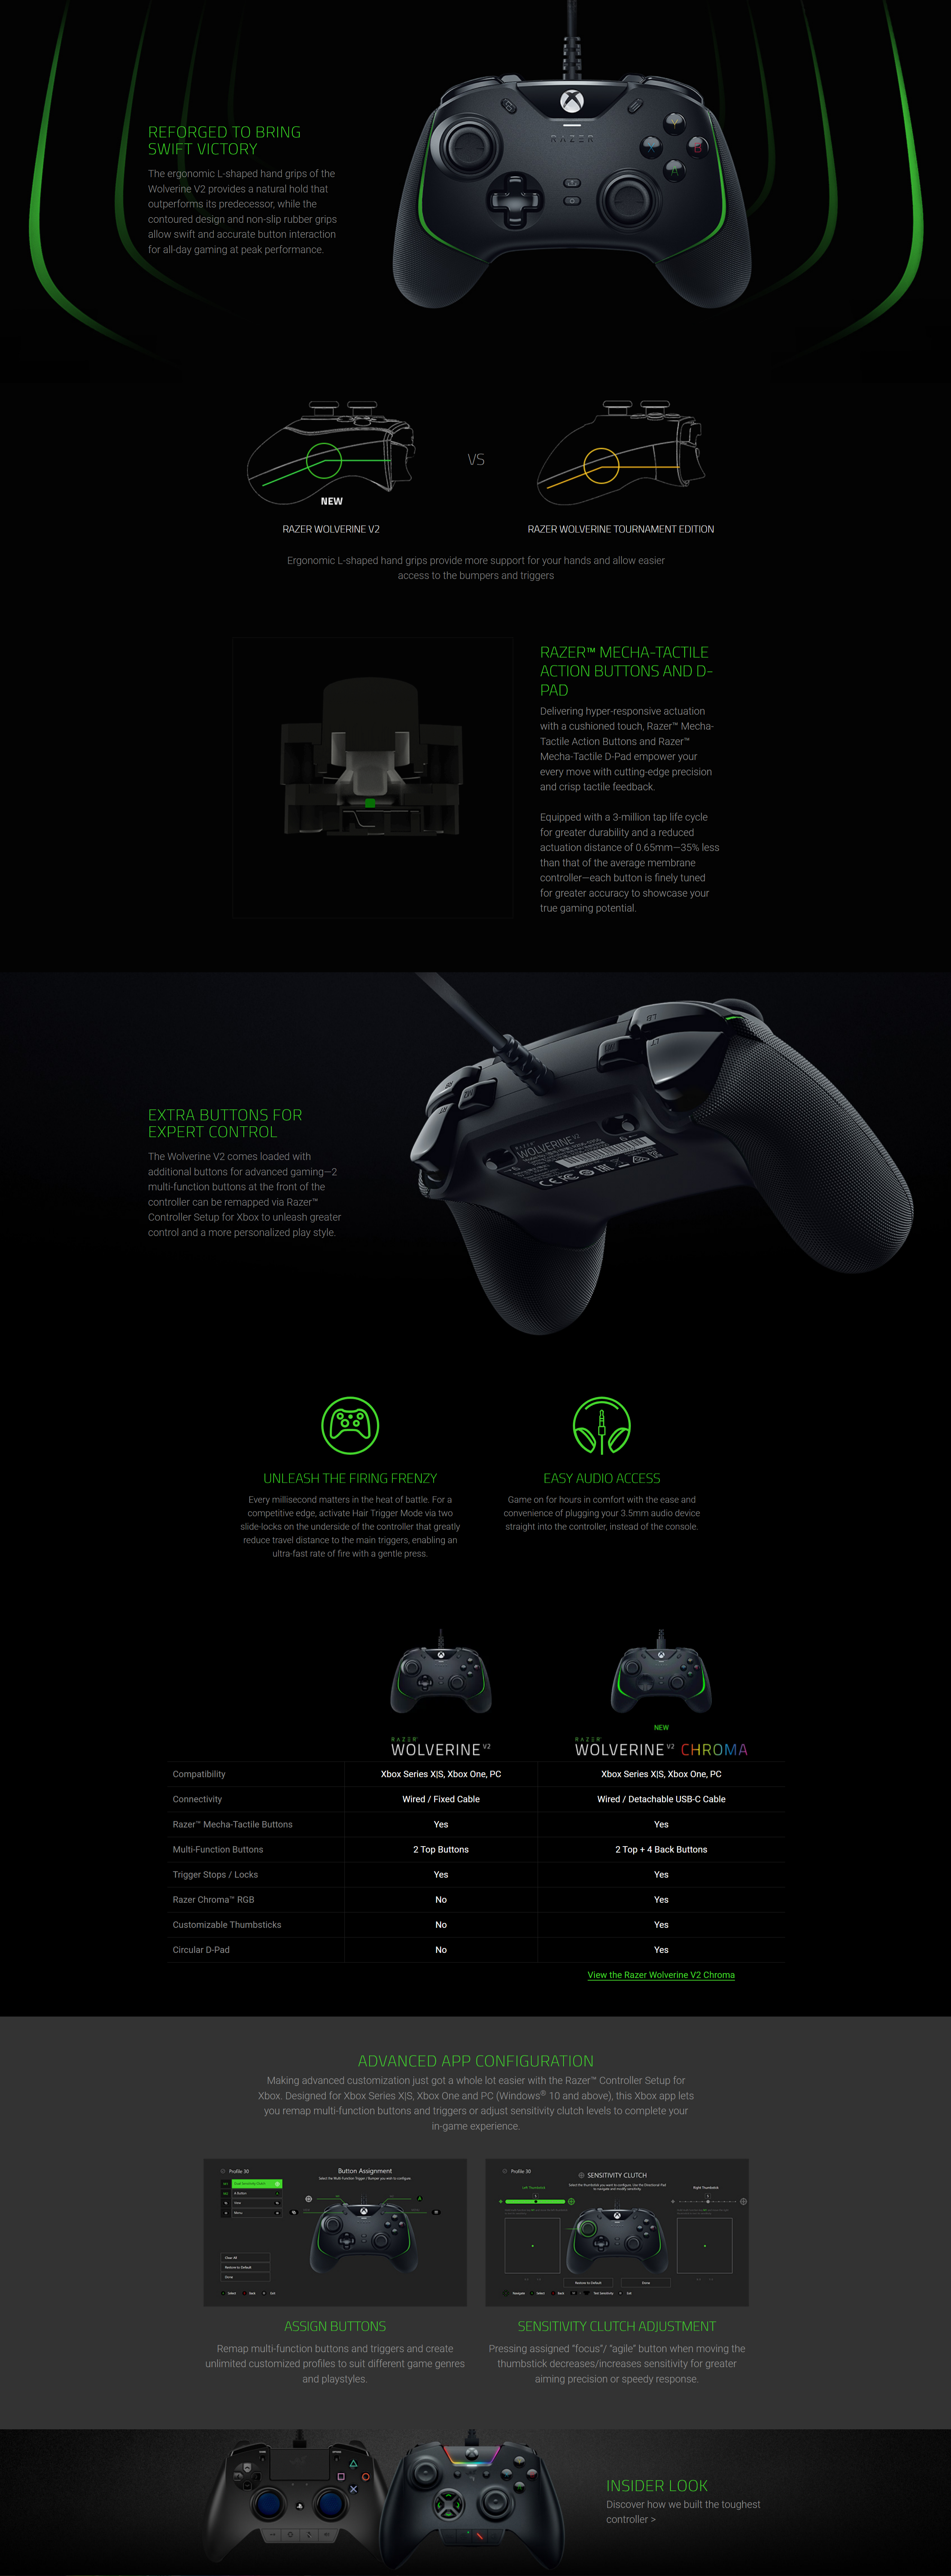 A large marketing image providing additional information about the product Razer Wolverine V2 - Wired Gaming Controller for Xbox Series X - Additional alt info not provided